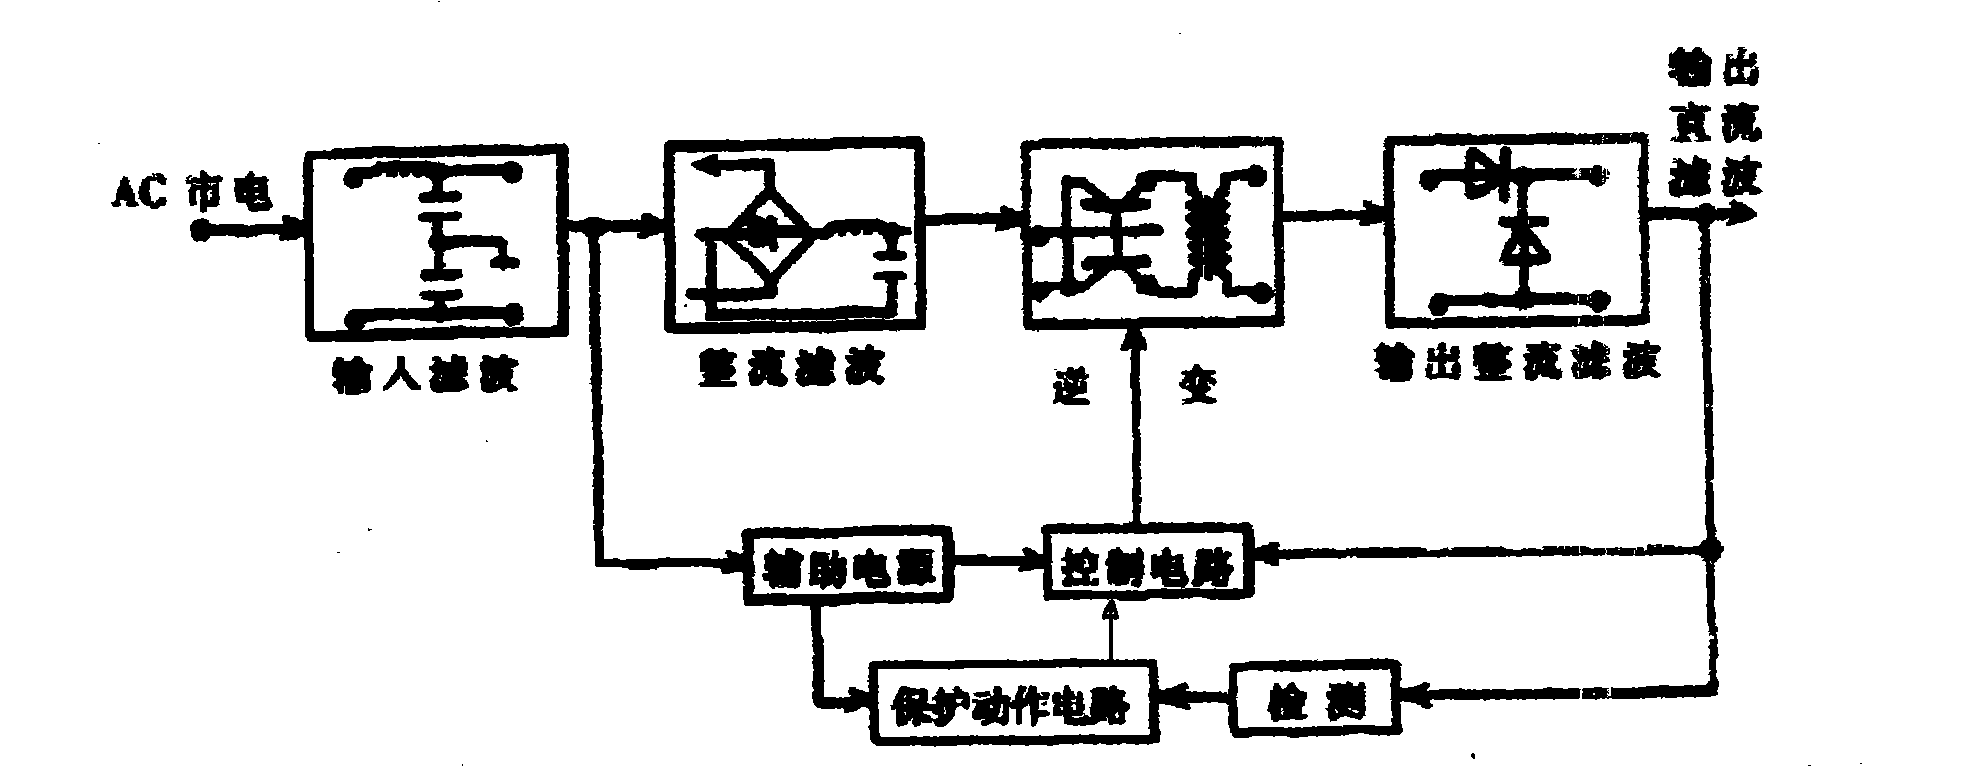 Substation ground network defect synthesis diagnosis method and diagnosis system thereof